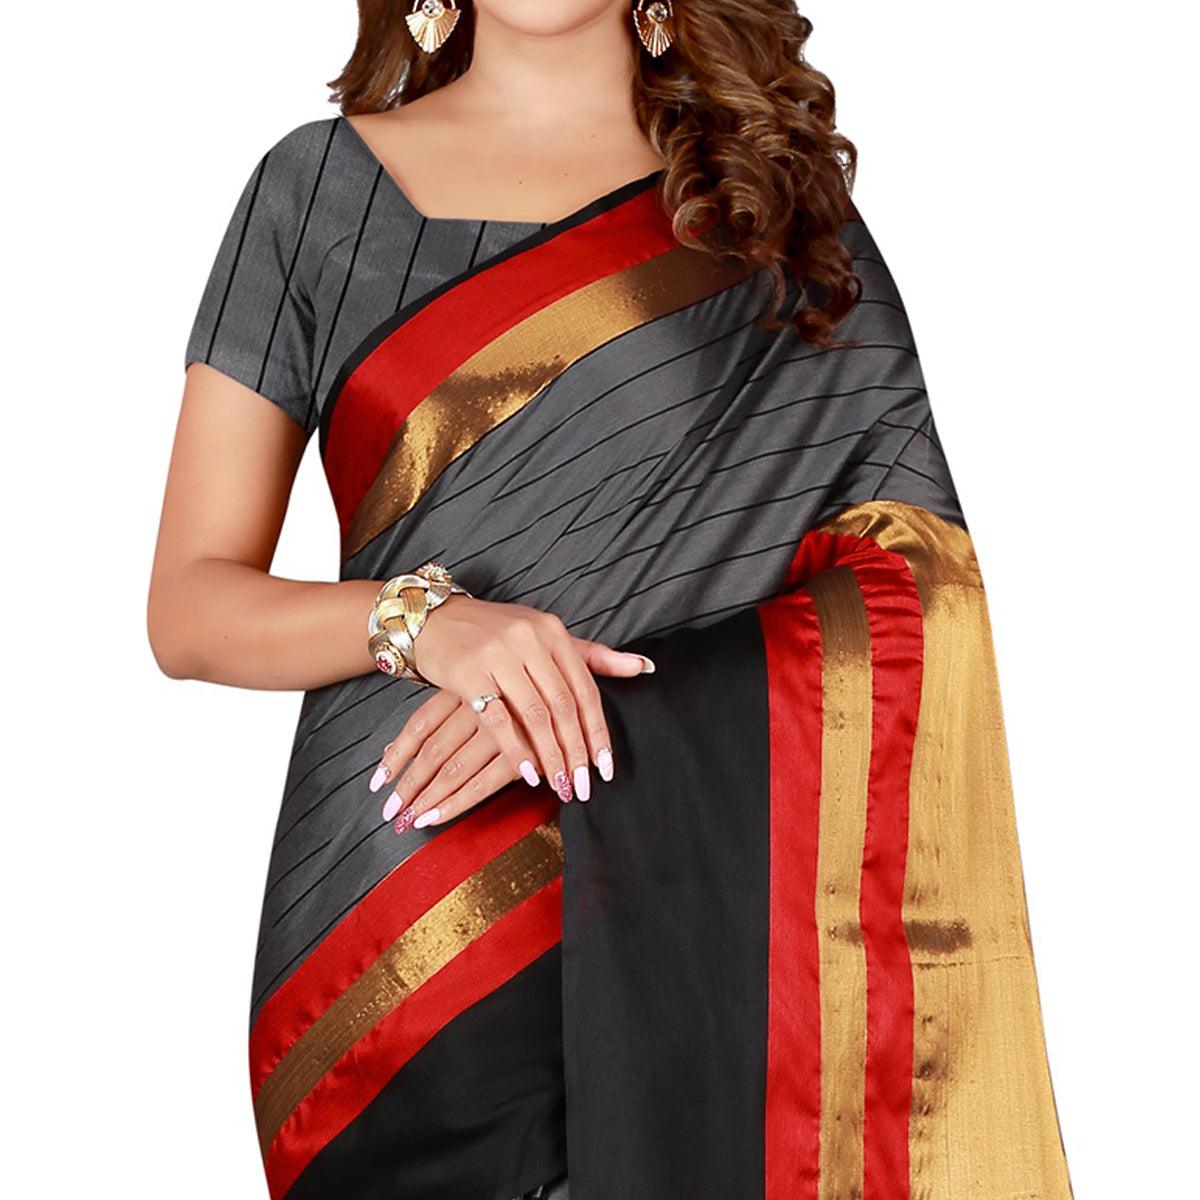 Engrossing Gray Colored Casual Wear Cotton Saree - Peachmode